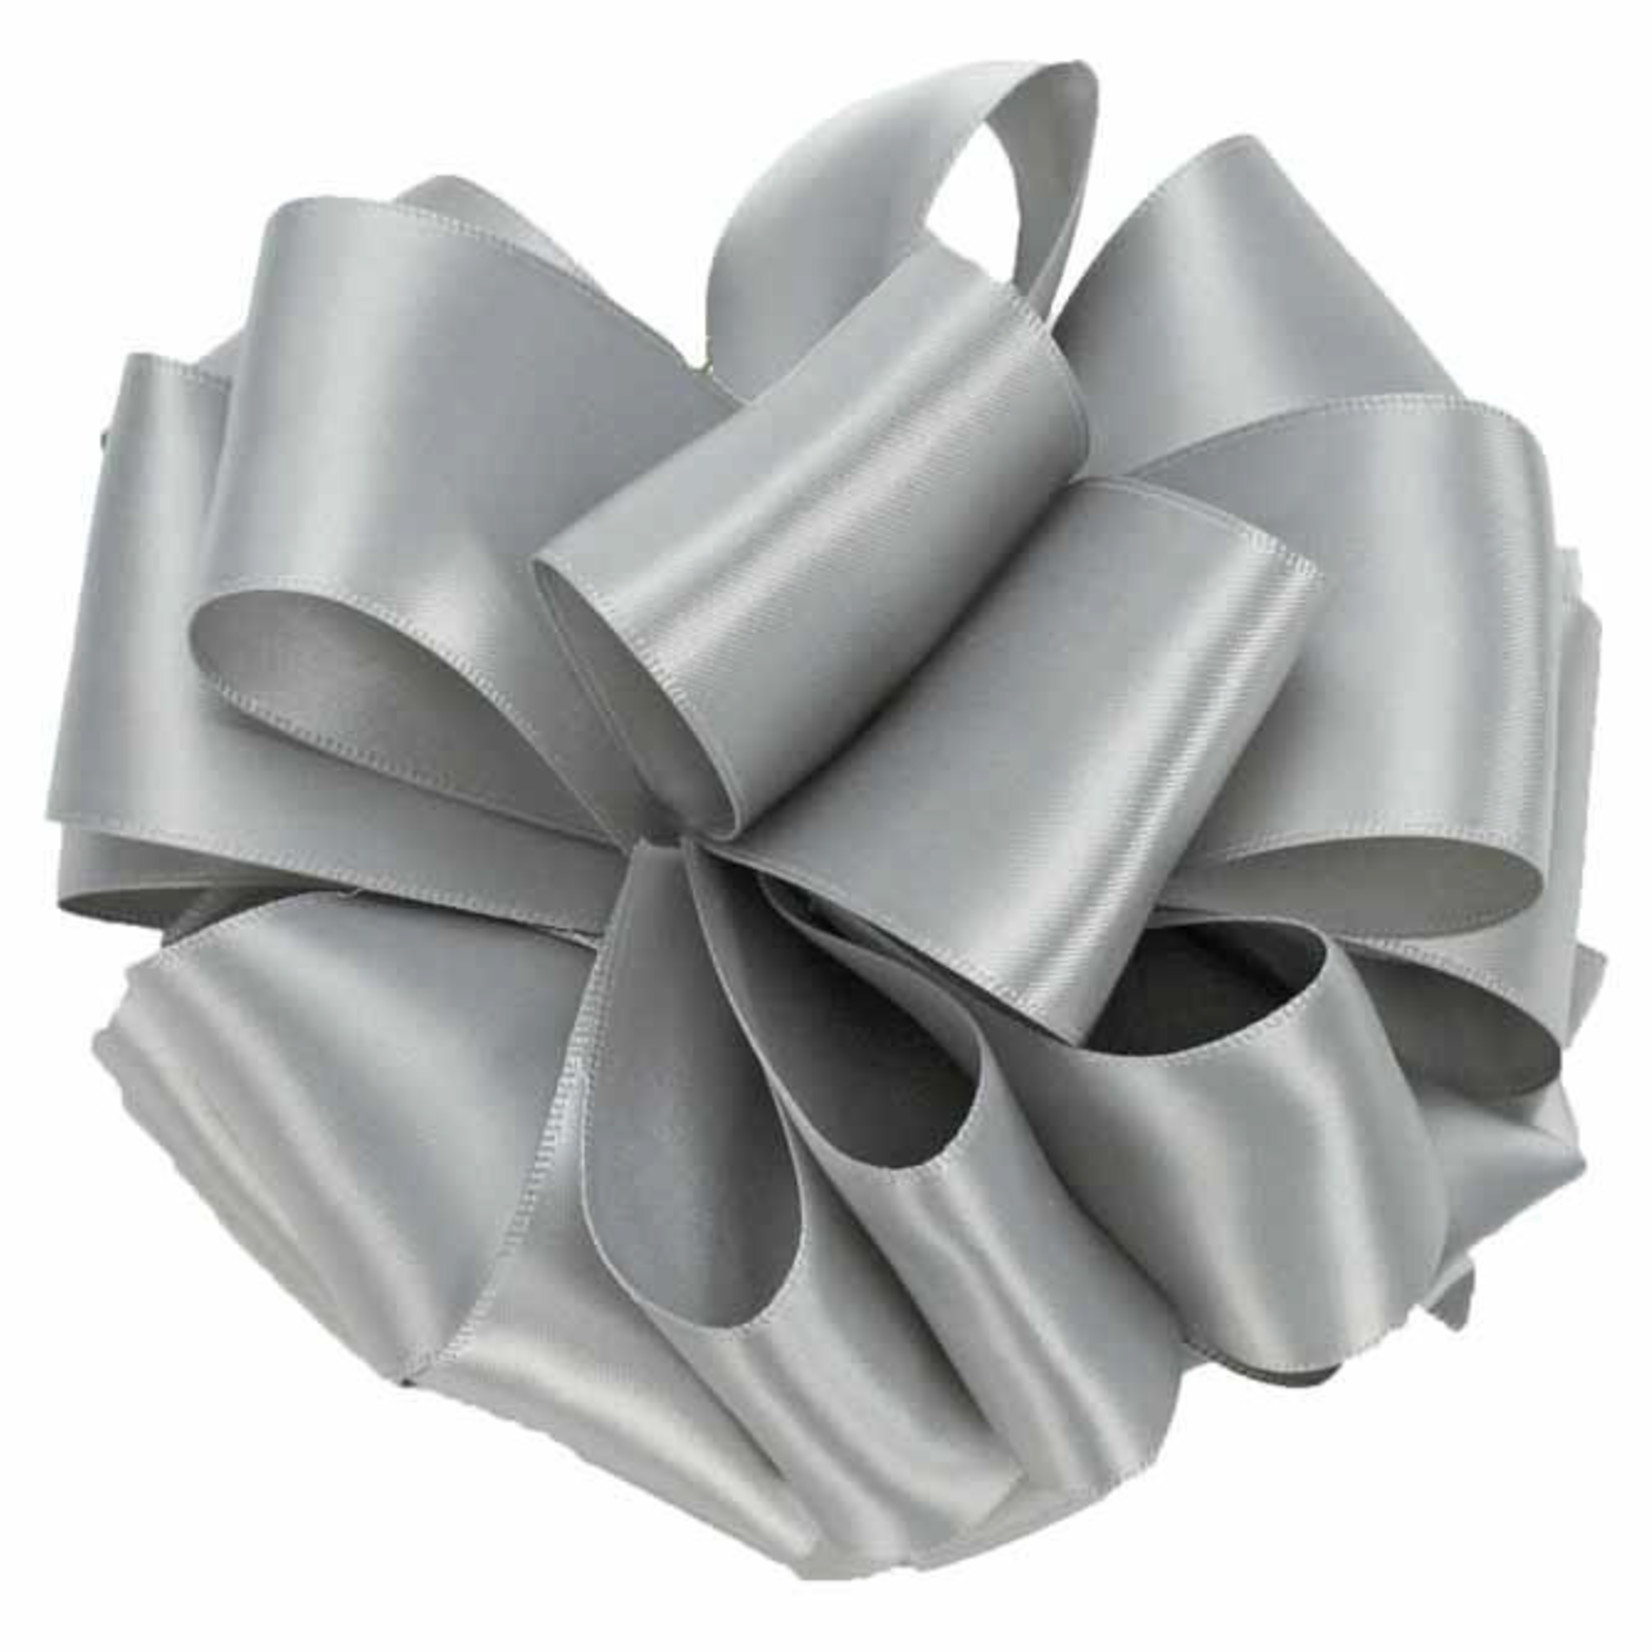 #9, 50 YD, DOUBLE FACE SATIN RIBBON “SILVER”